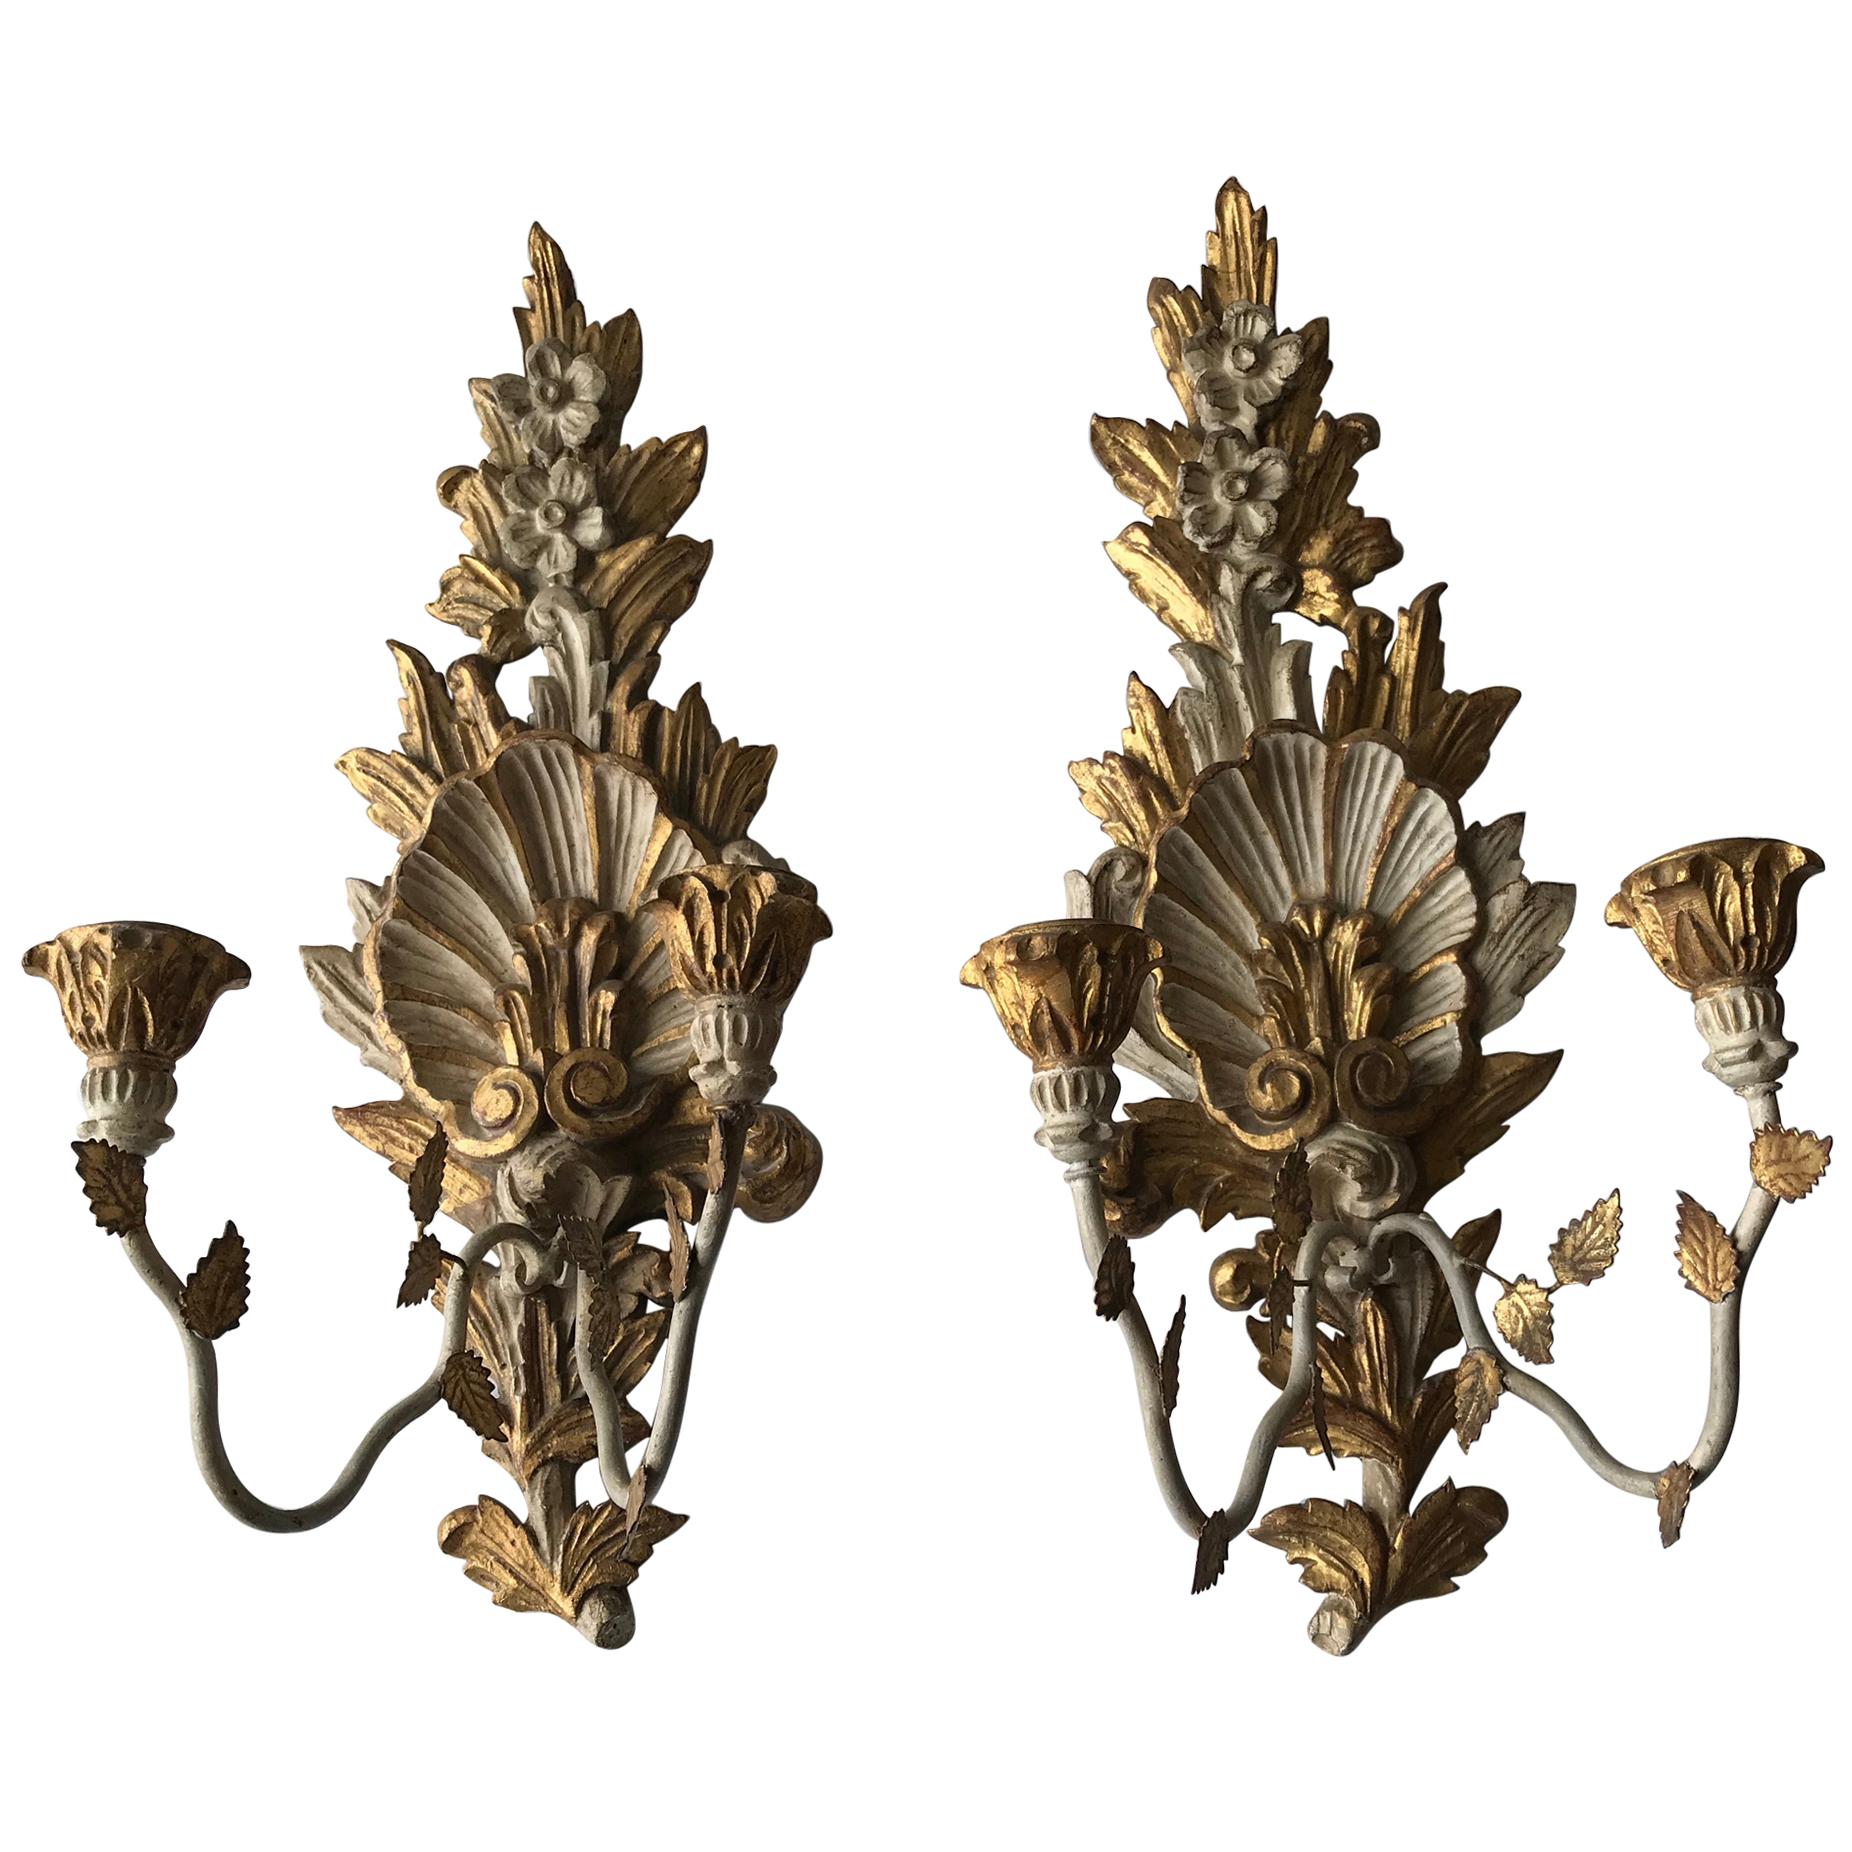 Pair of Italian Carved Wood and Metal Shell Motif Sconces